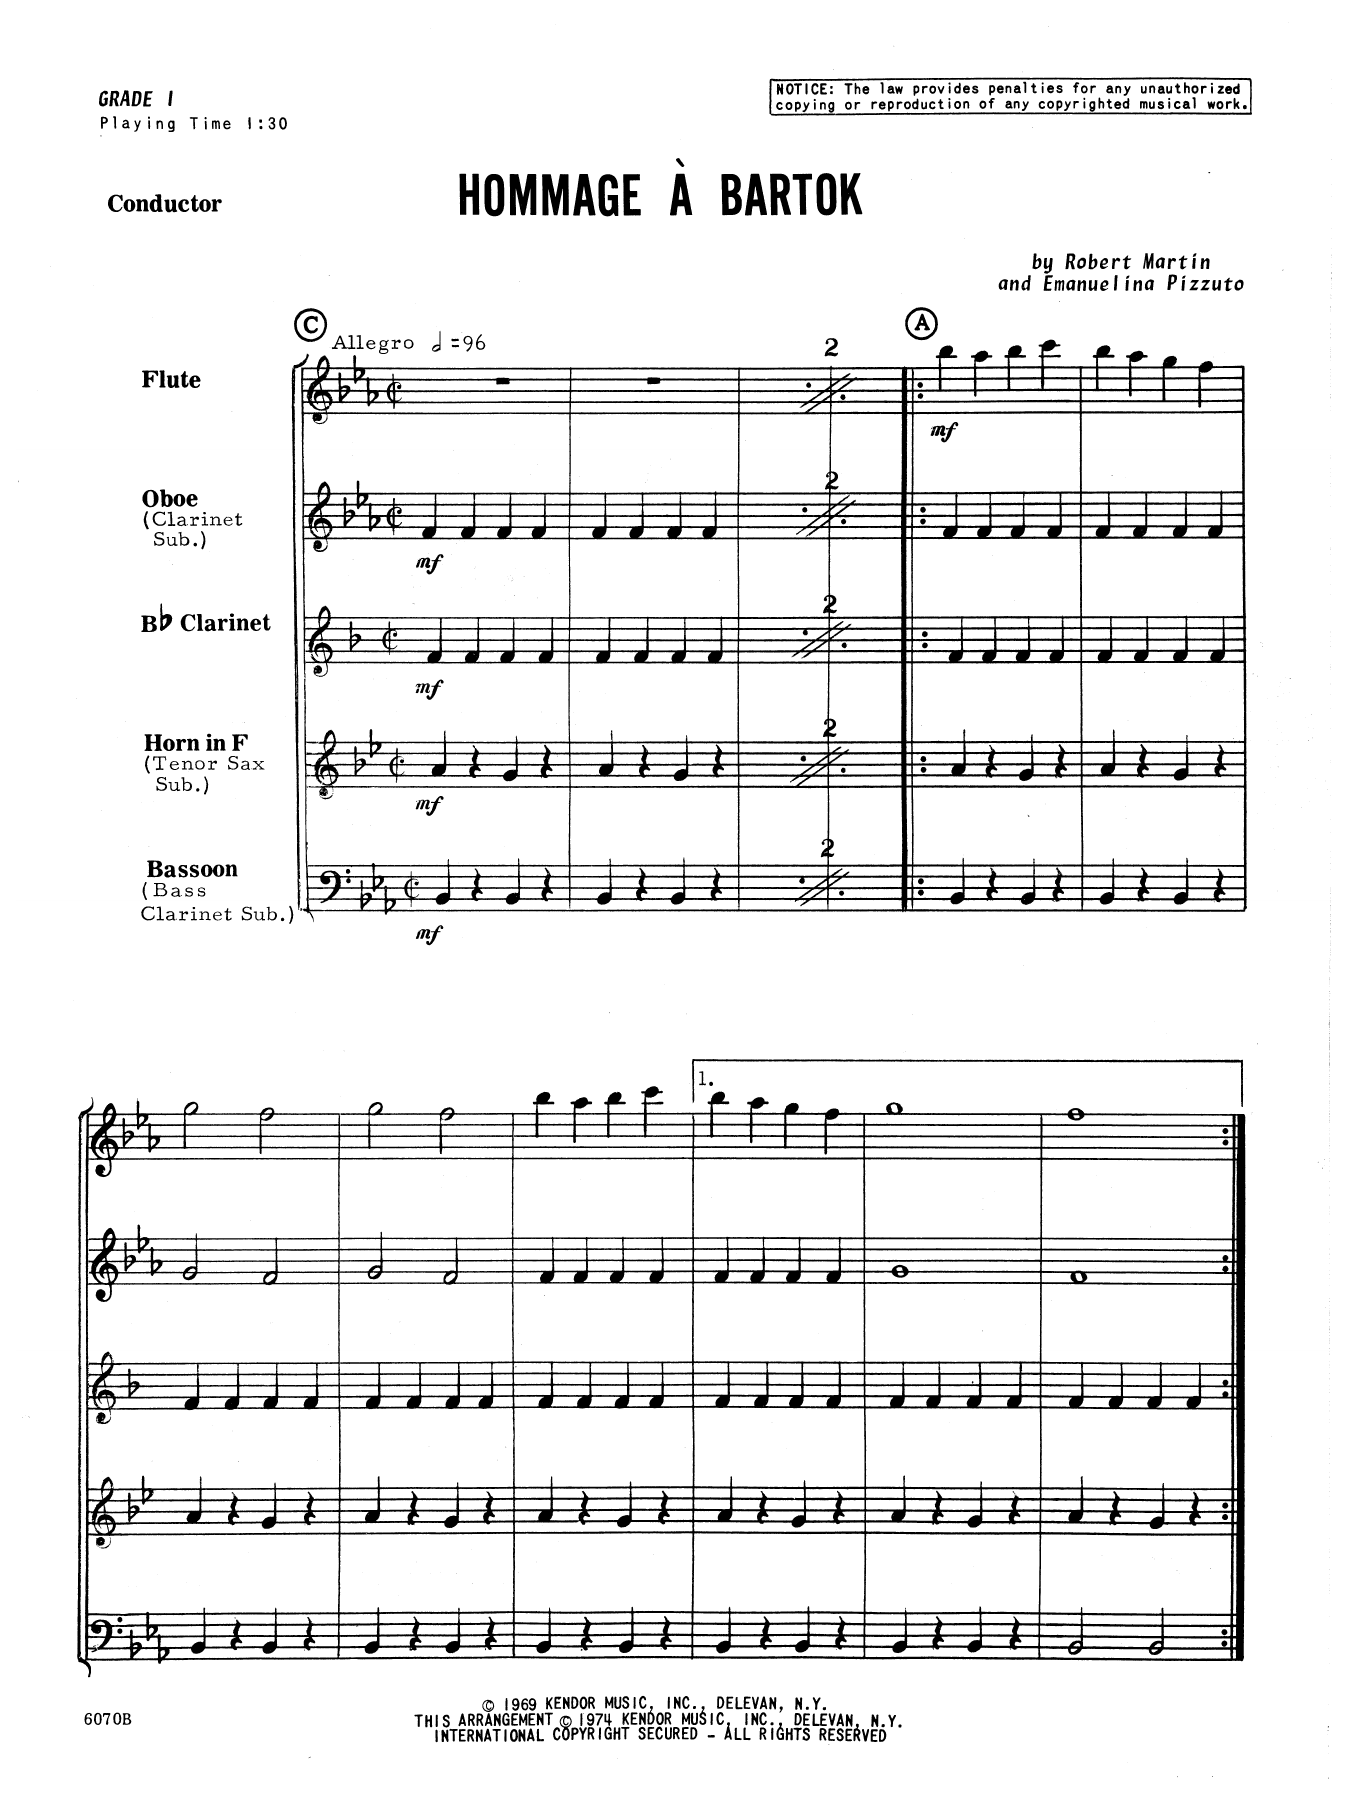 Martin Hommage A Bartok - Full Score sheet music notes and chords. Download Printable PDF.